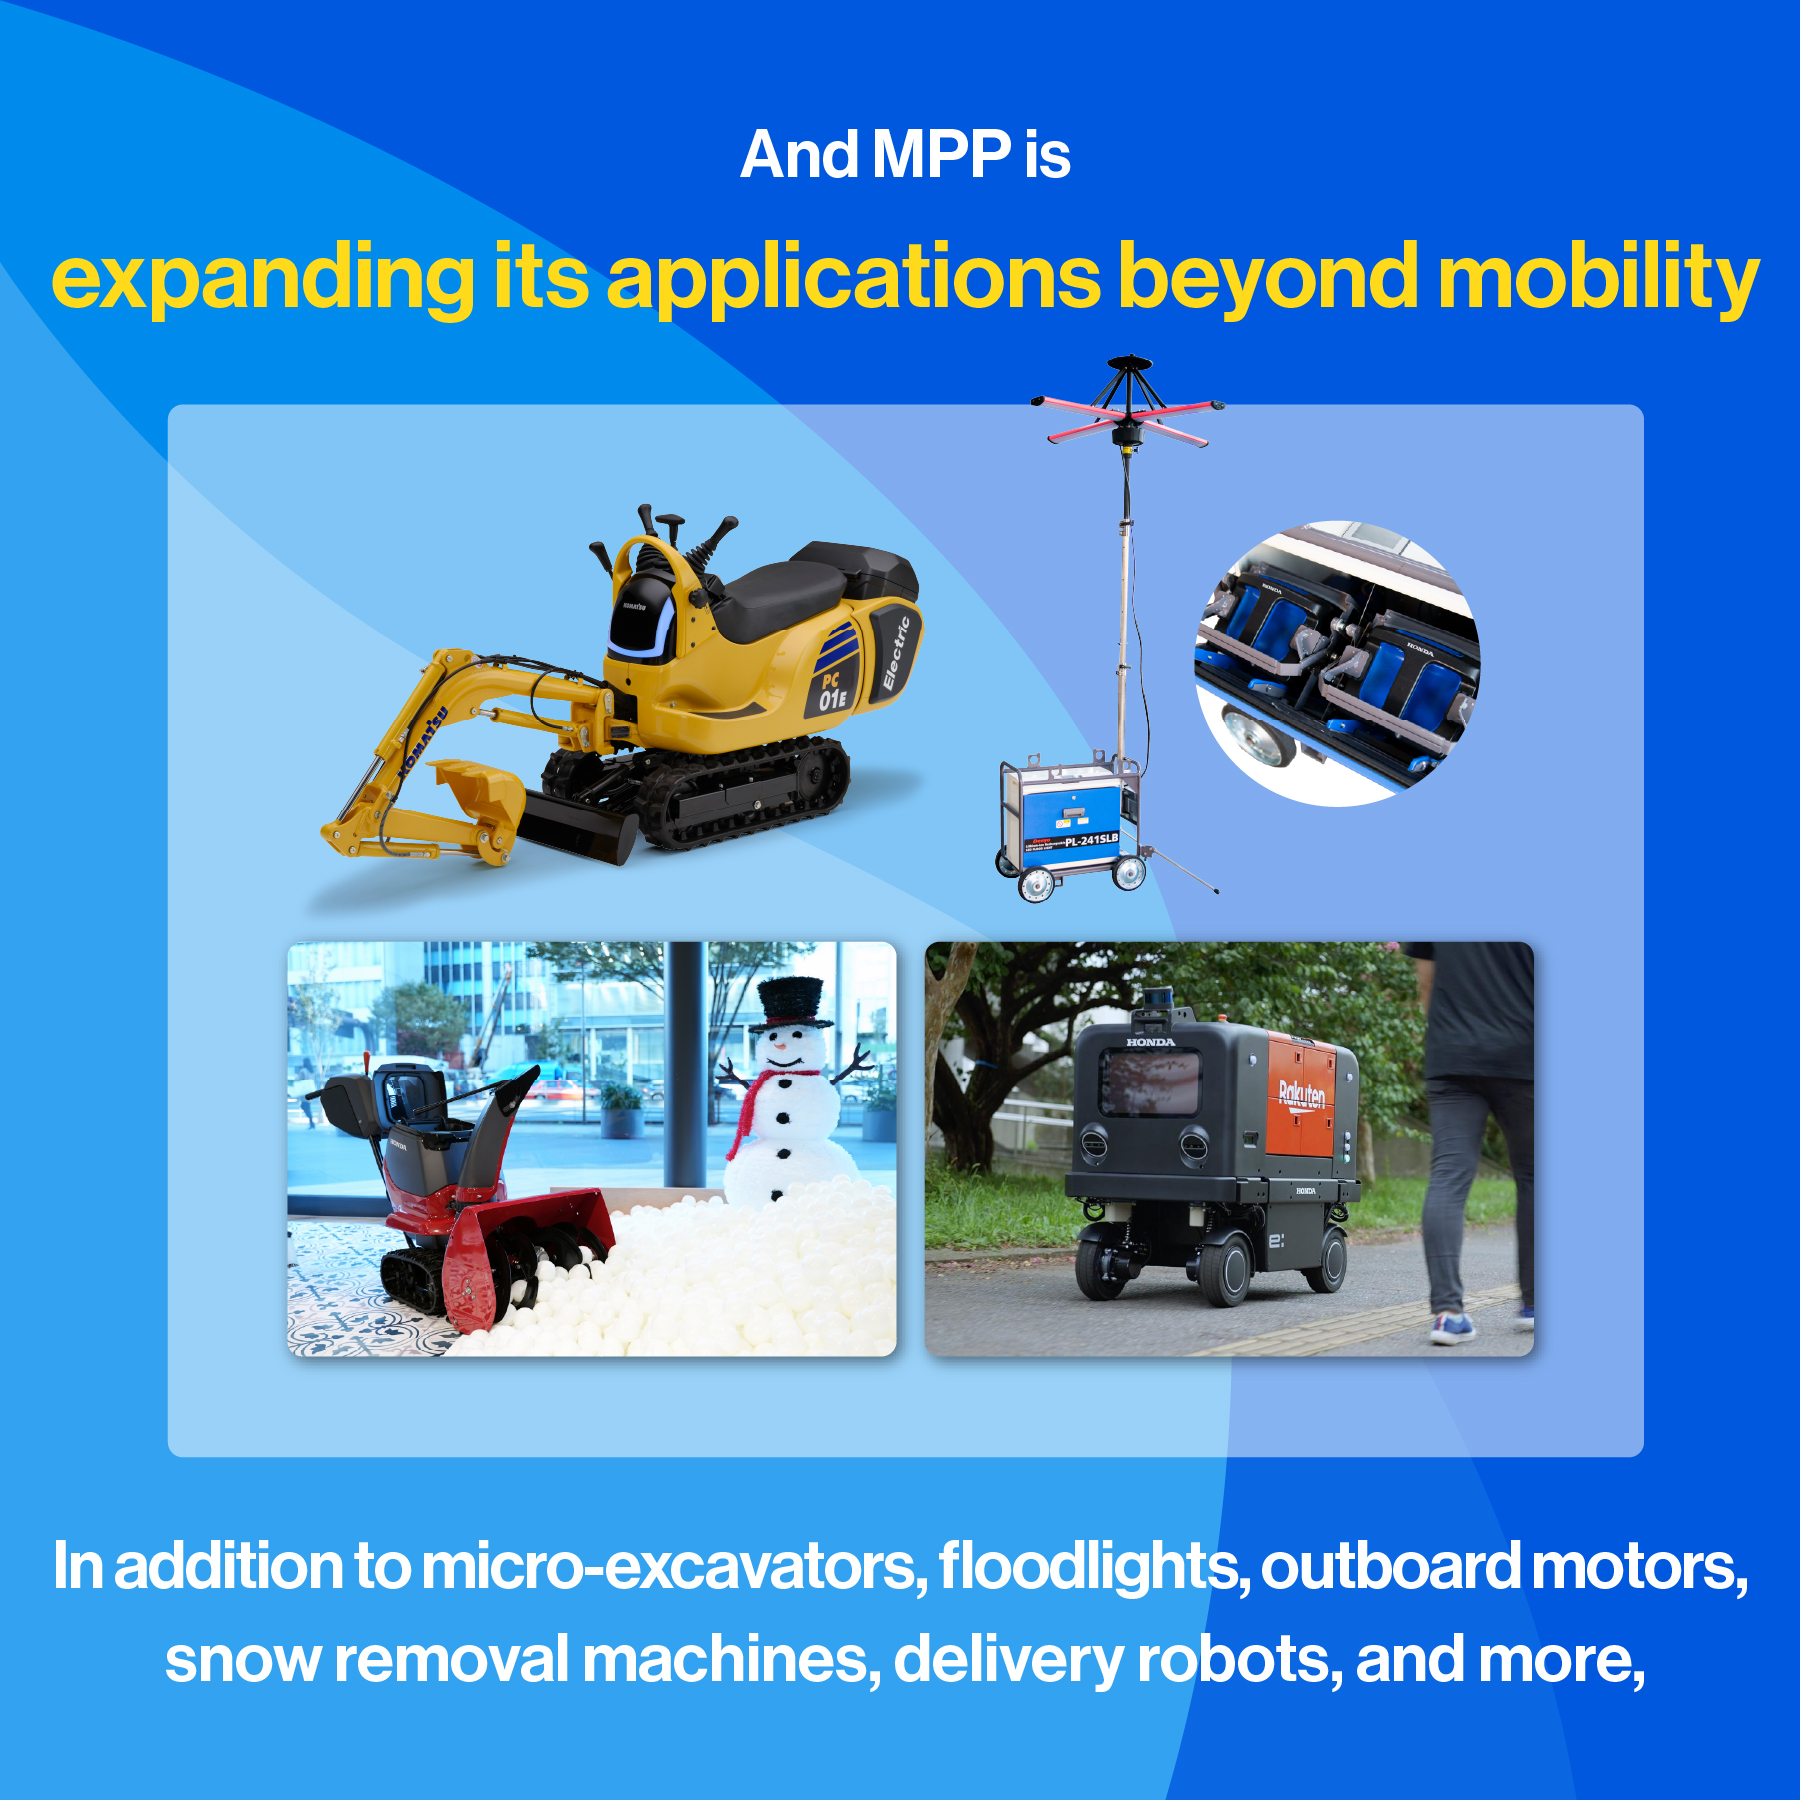 Expanding the scope of application to include micro-excavators, floodlights, delivery robots, outboard motors, snow removal machines, and more